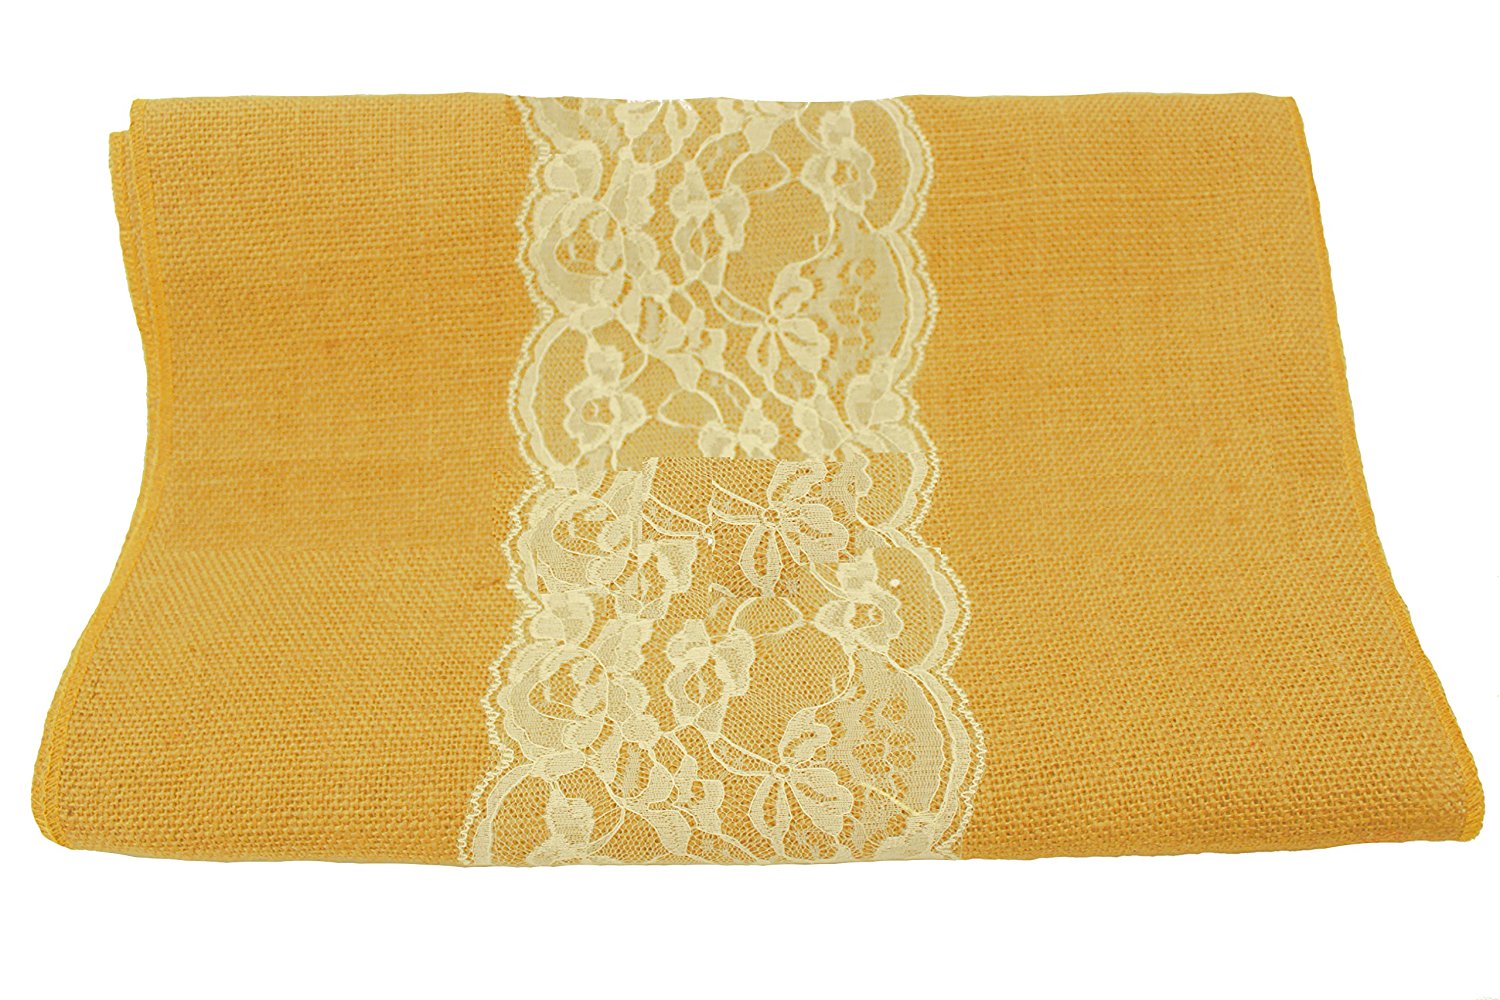 14" Butter Burlap Runner with 6" Ivory Lace